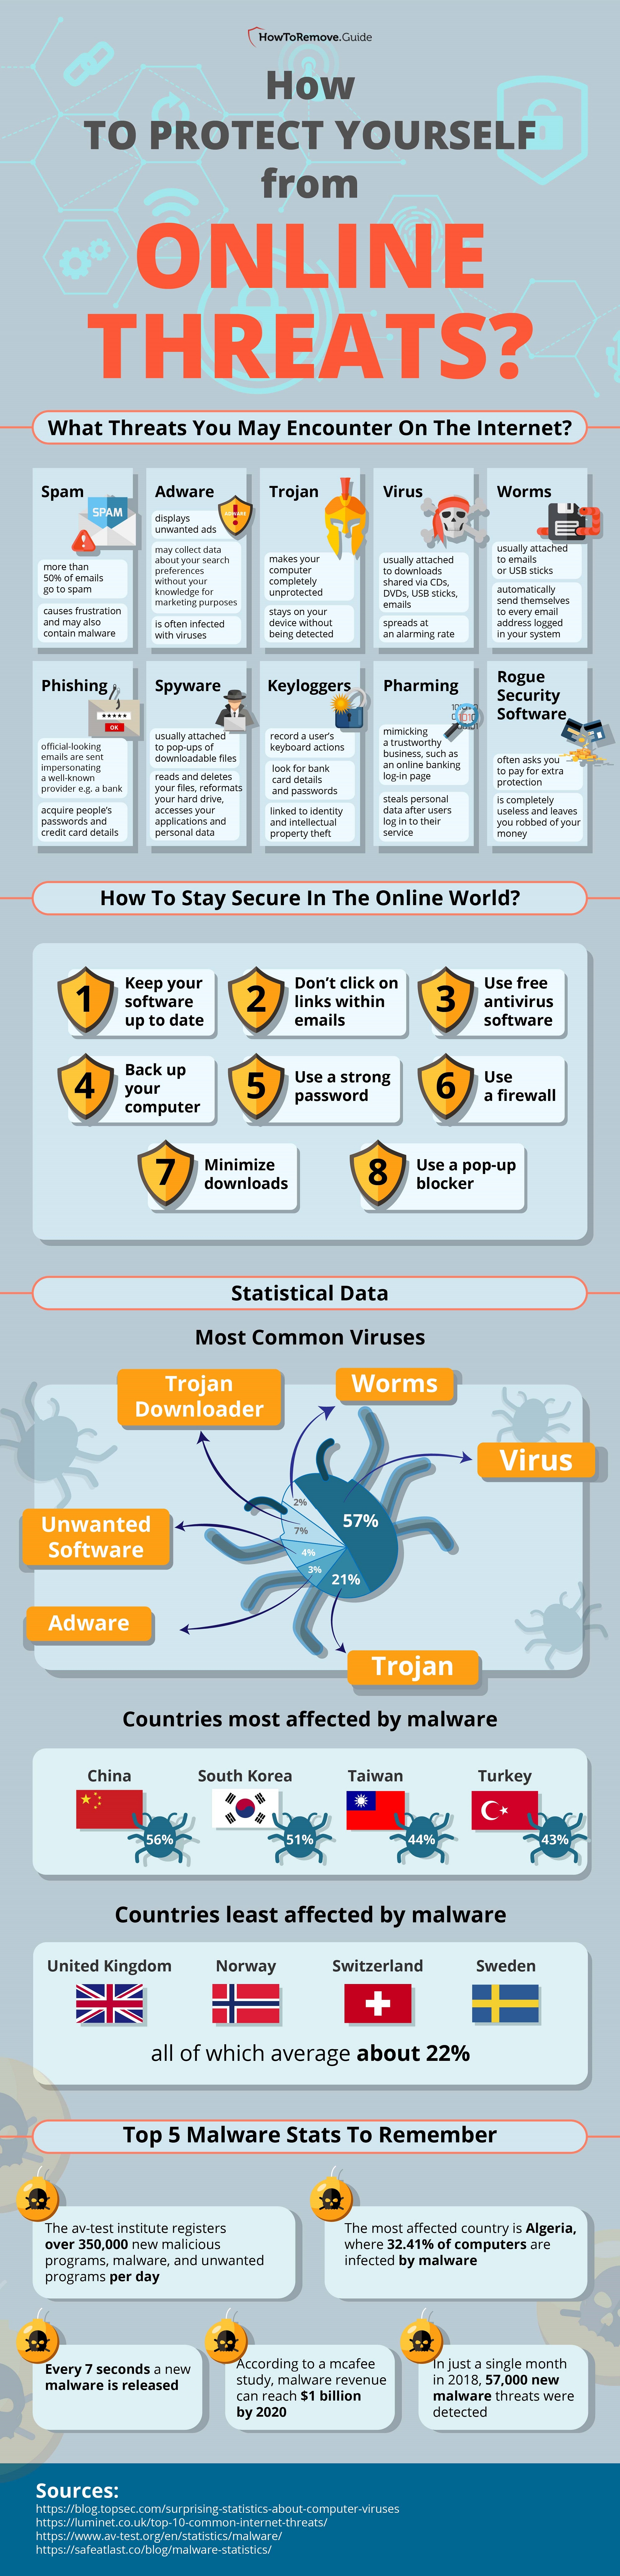 The Most Common Types of Viruses Affecting Your Computer